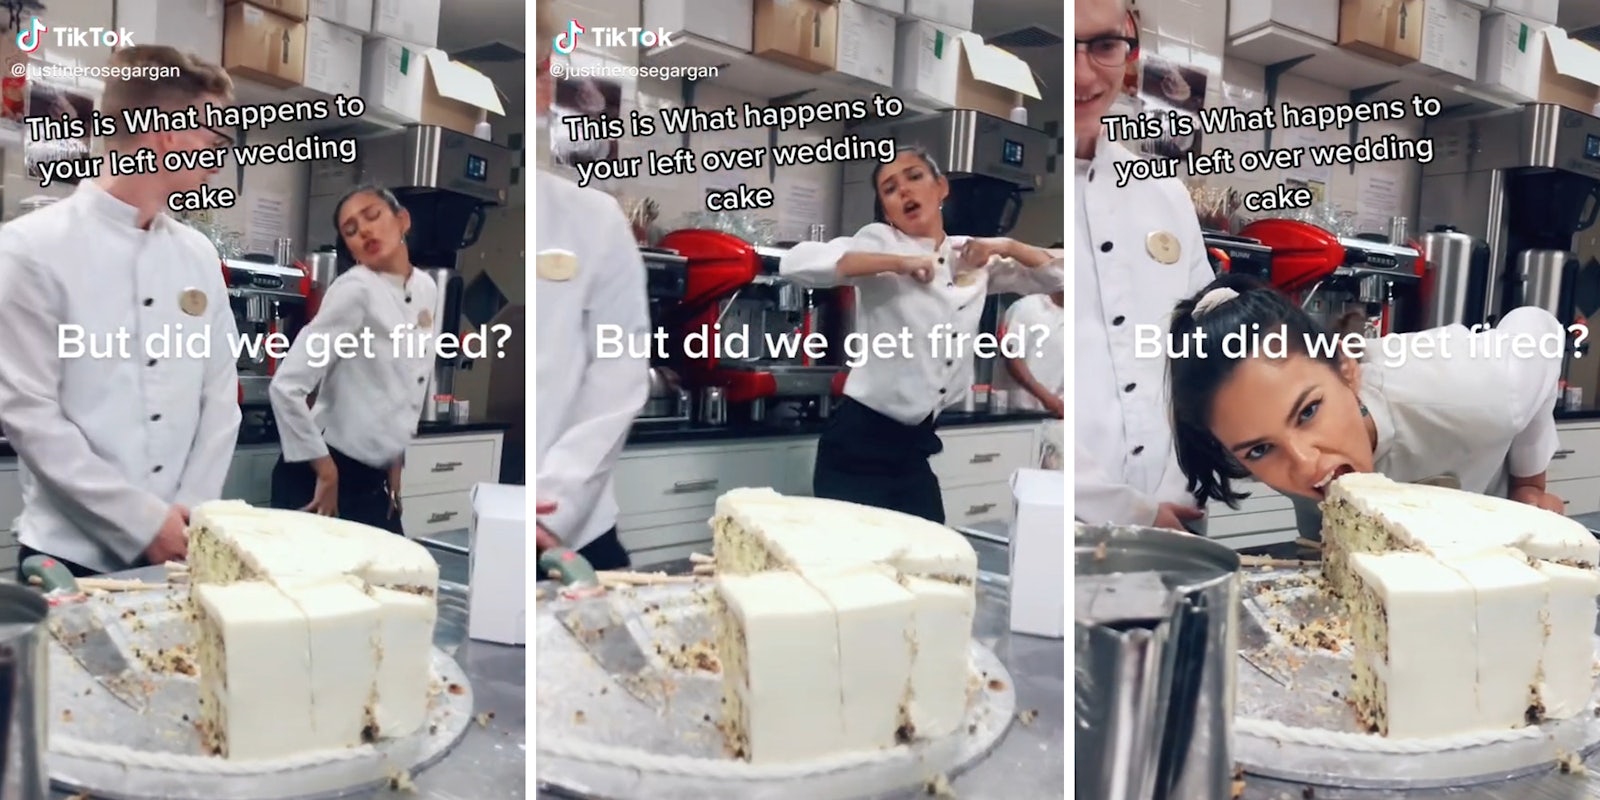 servers dance and eat wedding cake with captions 'this is what happens to your left over wedding cake' and 'but did we get fired?'